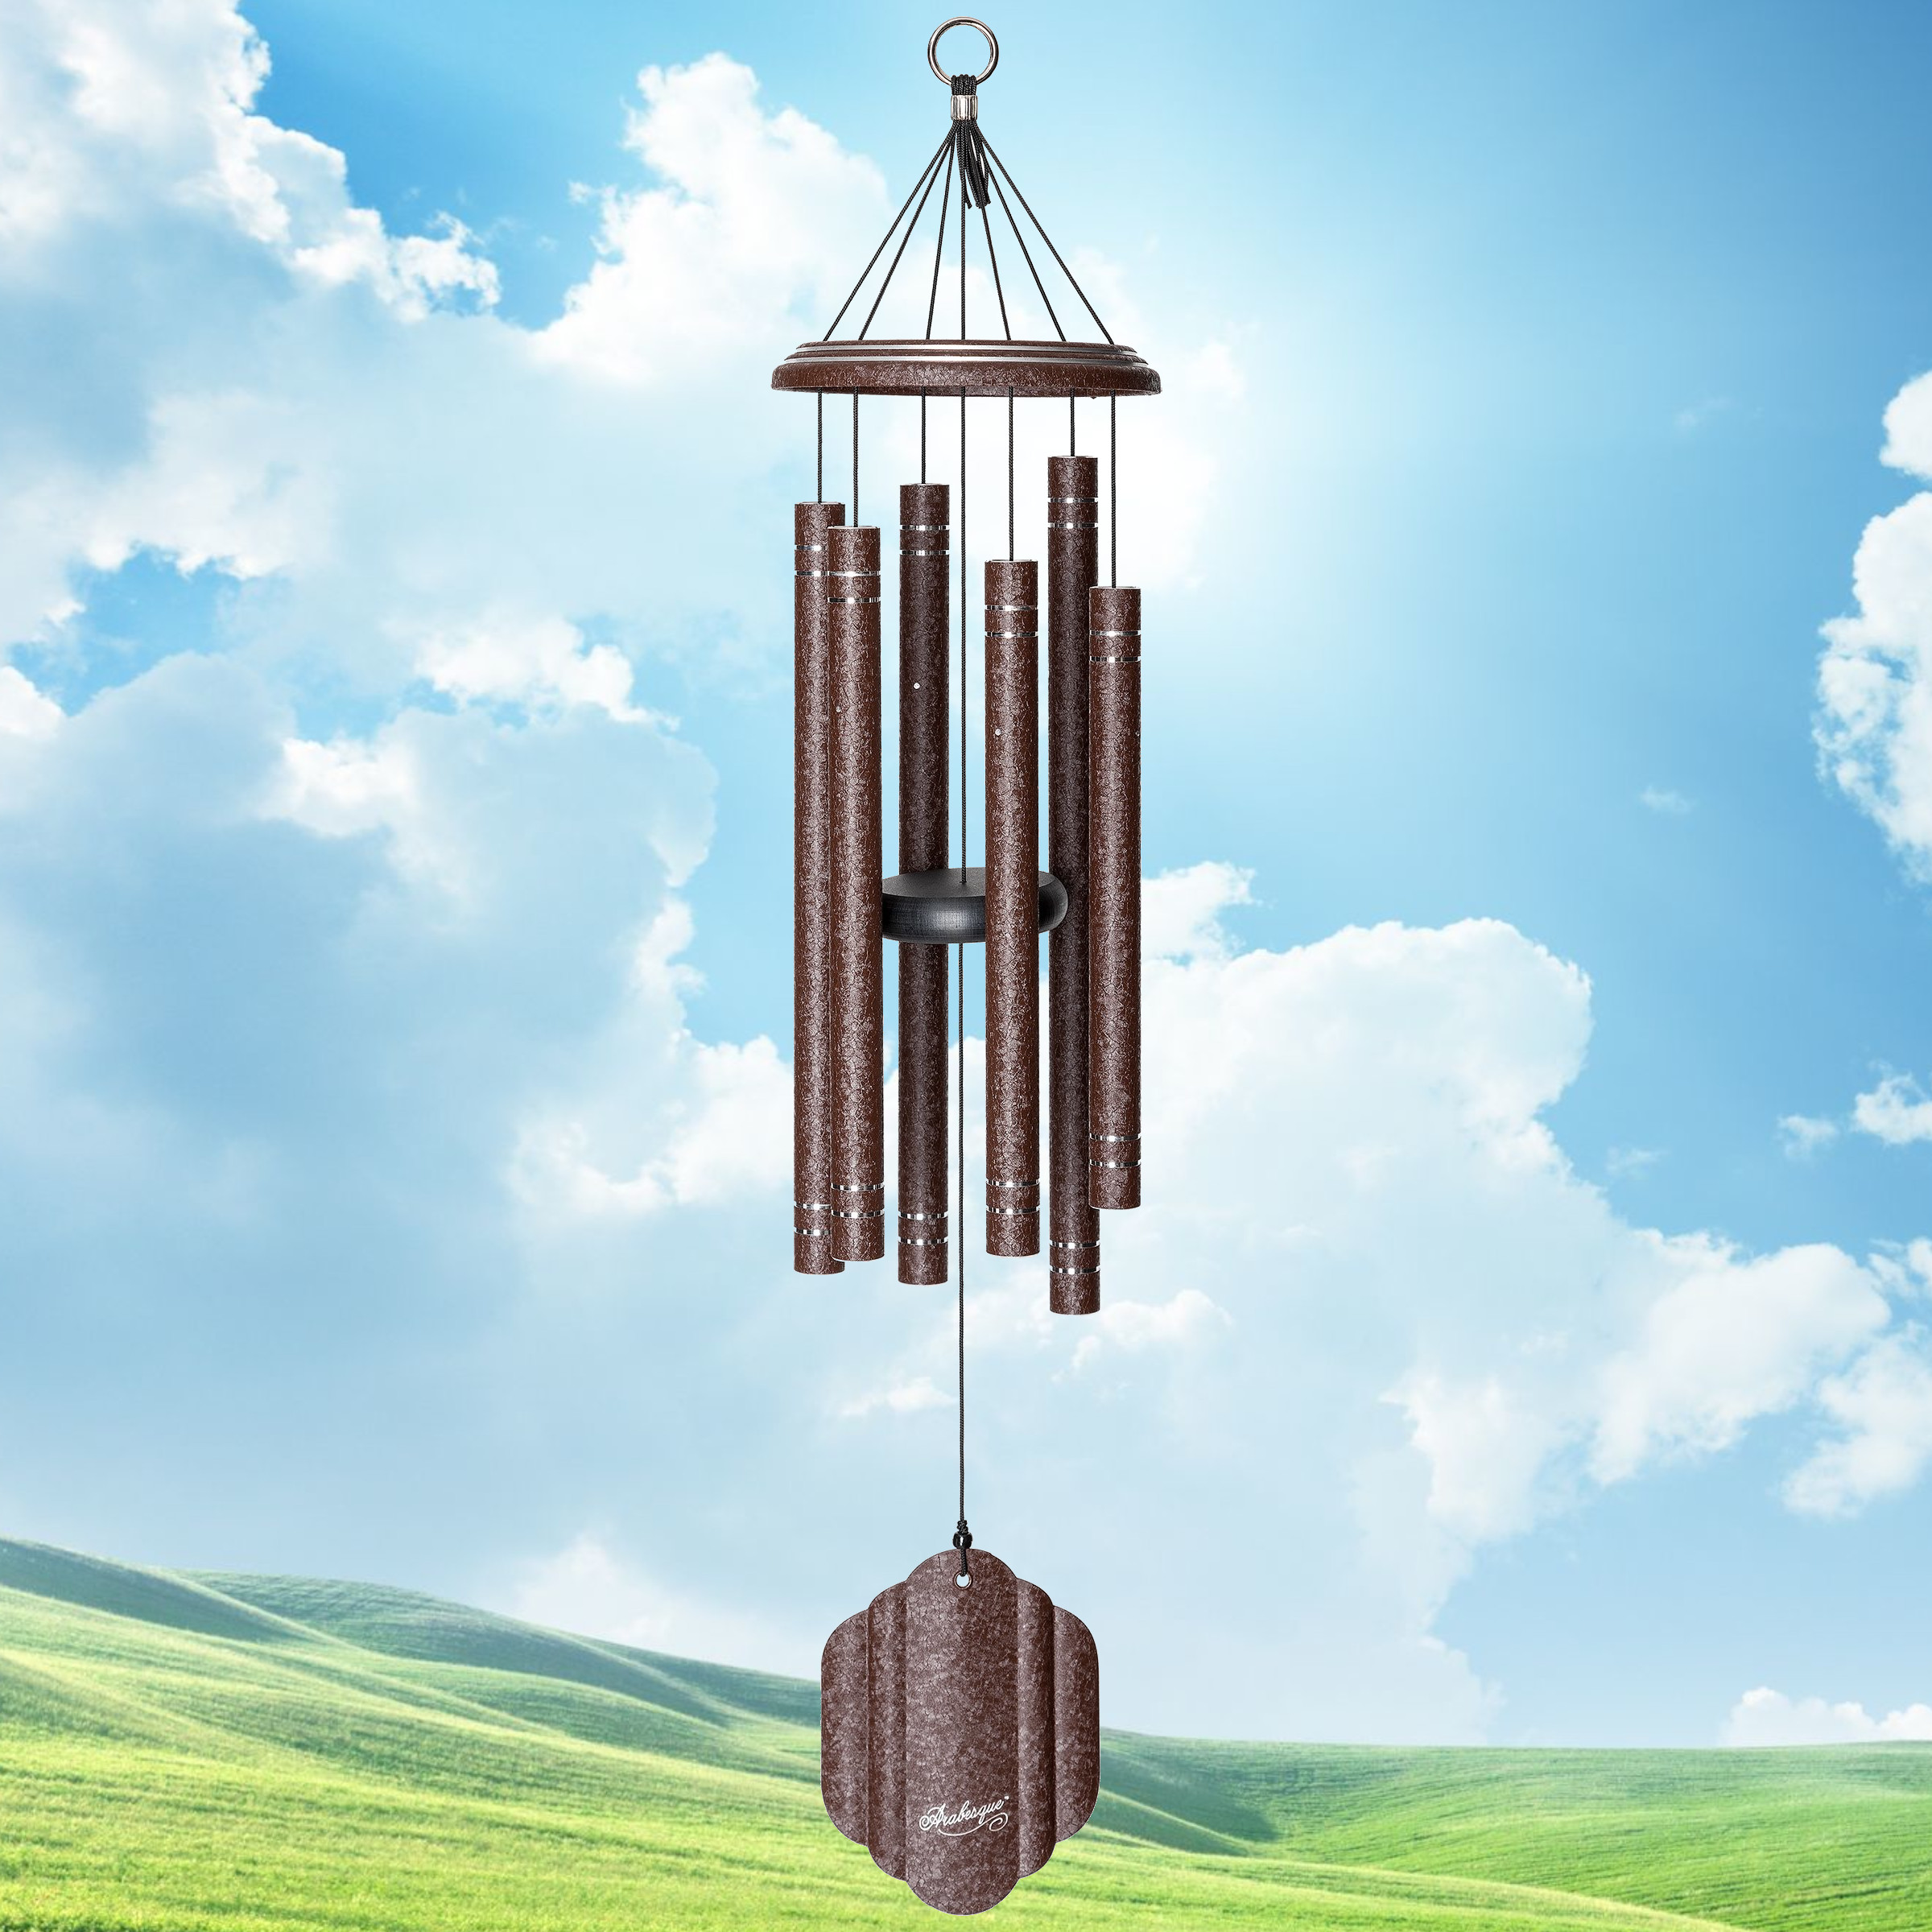 Arabesque 32 Inch Chocolate Diamond Wind Chime - Scale Of A